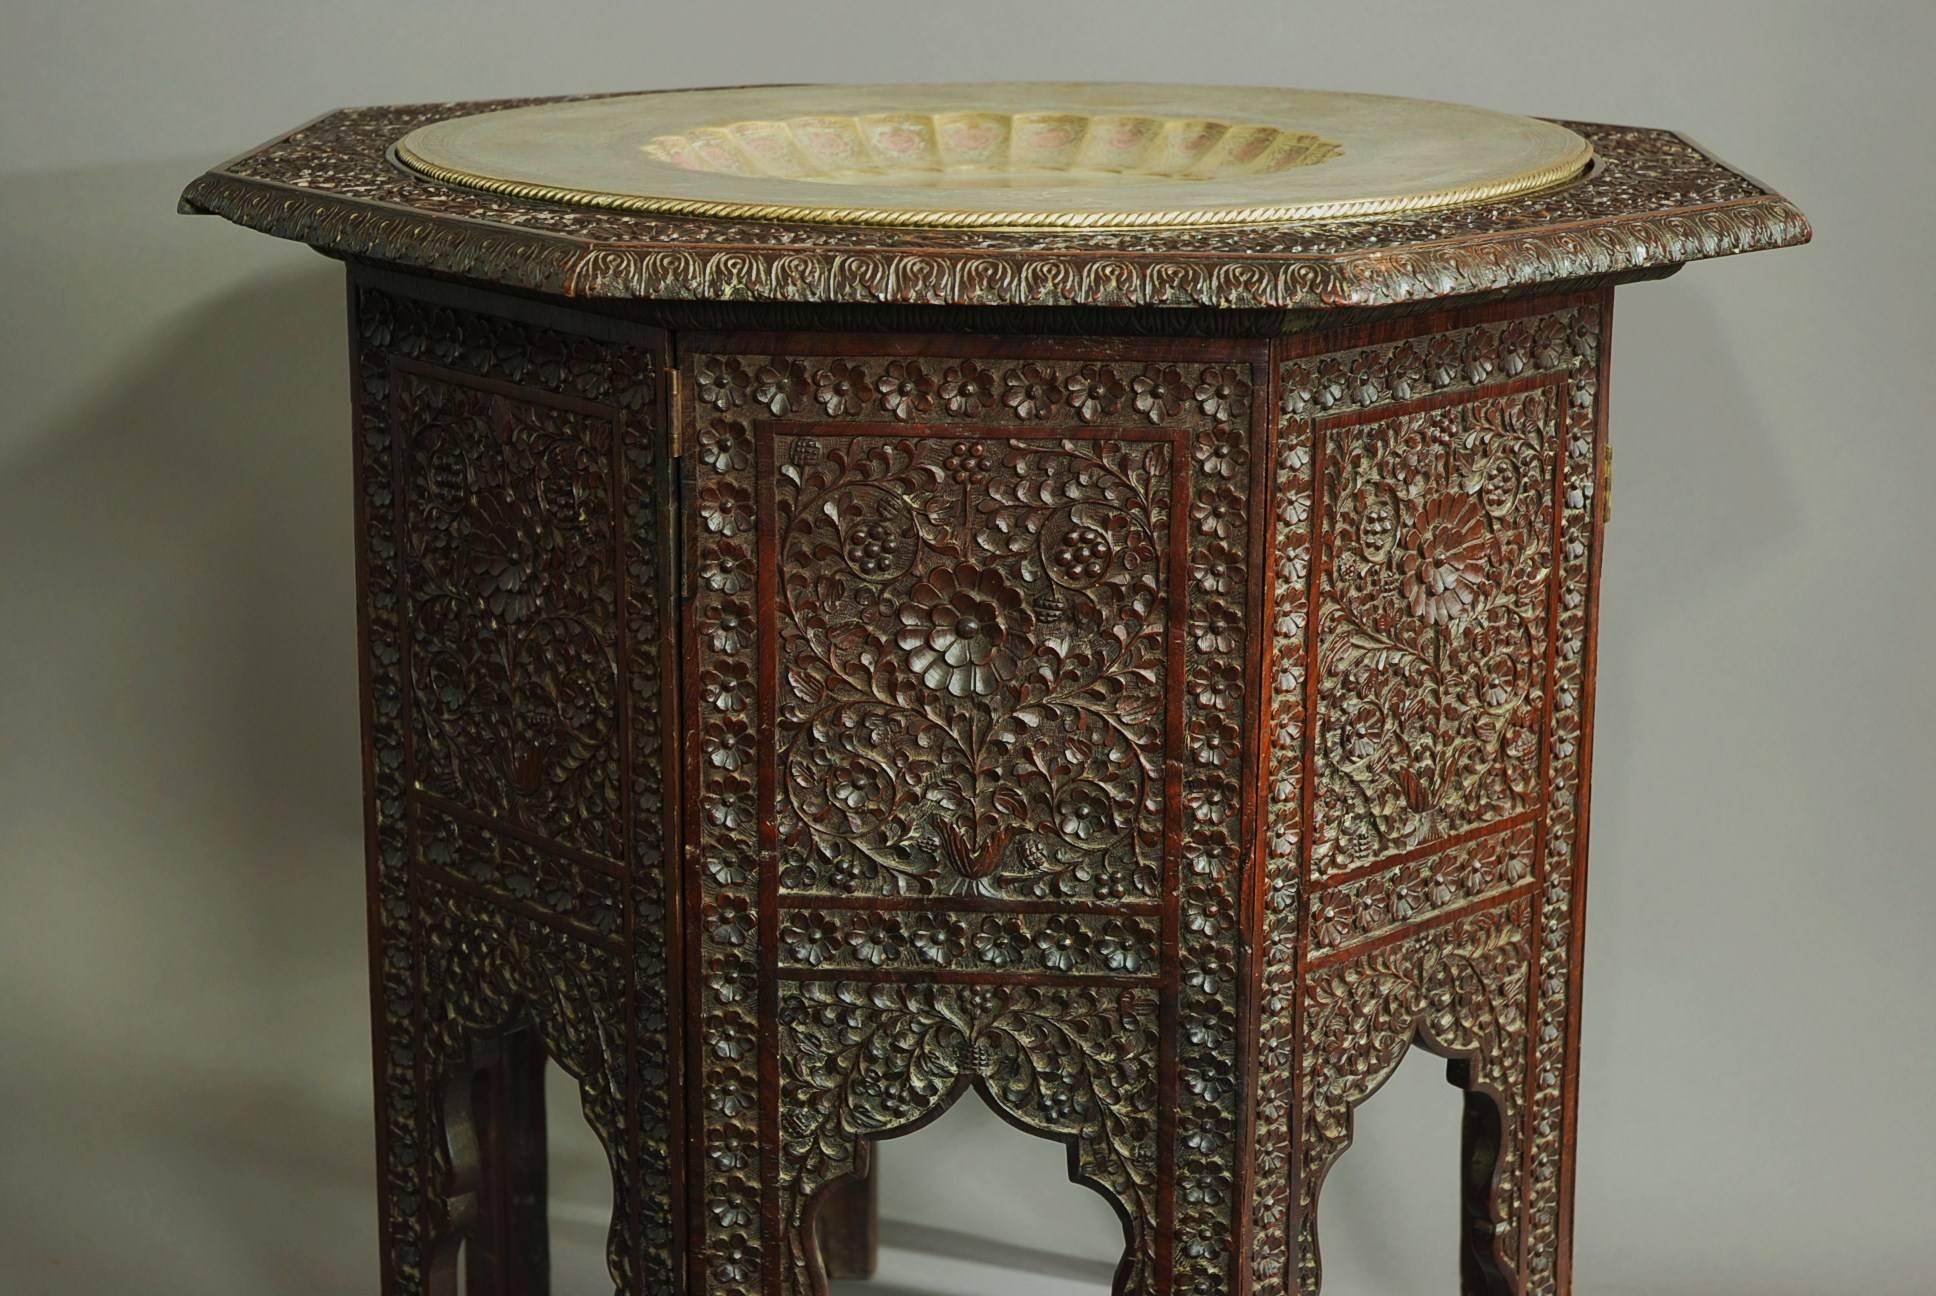 A large late 19th century hardwood highly decorative octagonal Indian table, possibly from the Bombay area.

The top consists of a circular brass inset tray that is supported by the tabletop. The brass tray is engraved and painted with male and